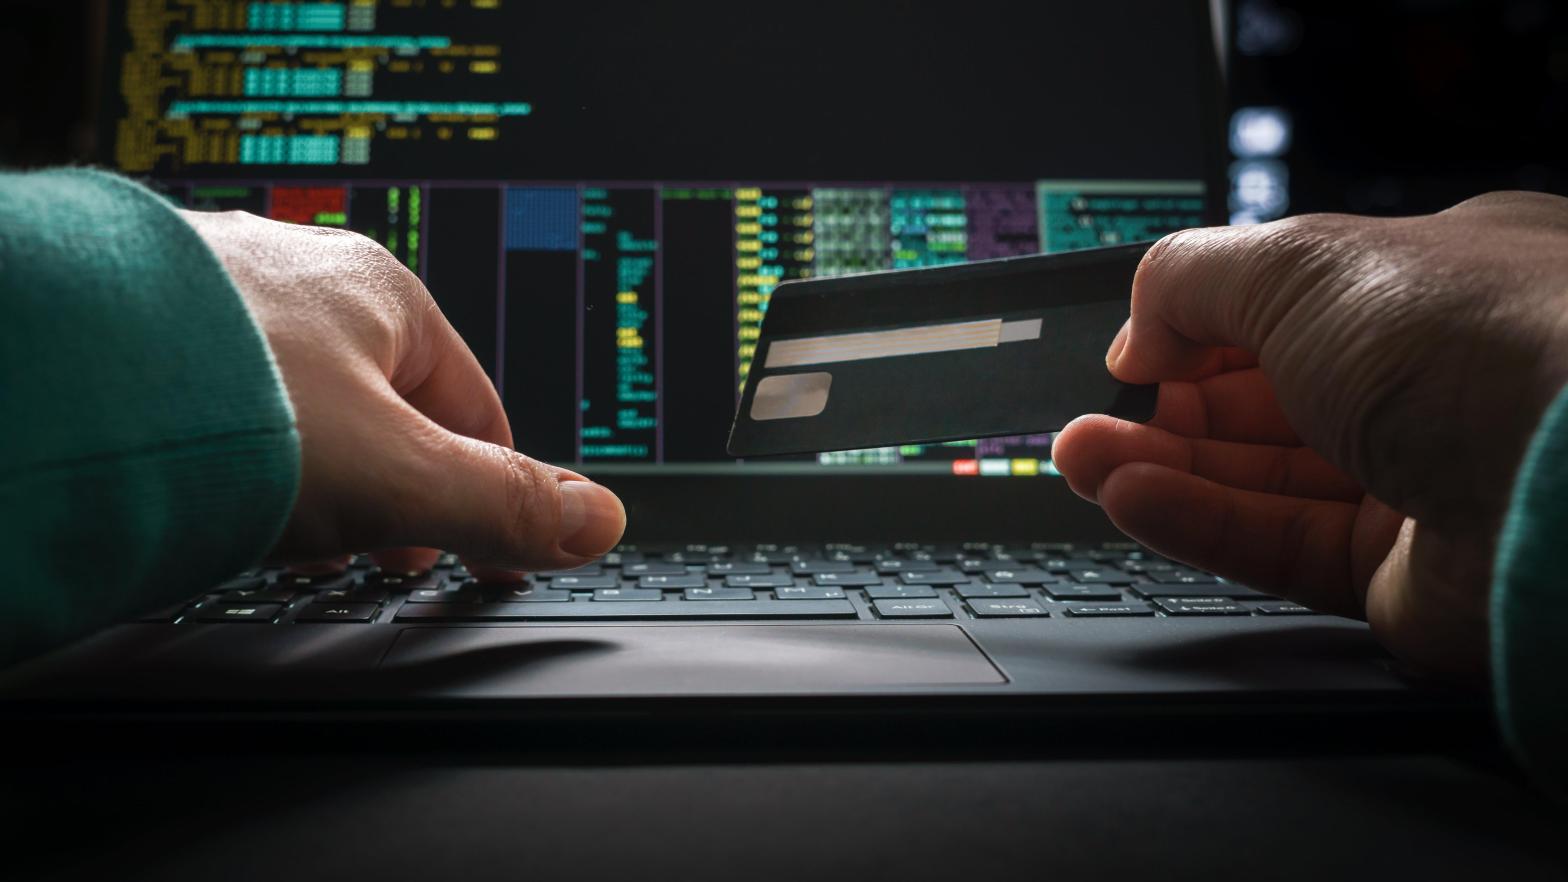 There's a remaining question on how many payment card details from a latest leak were active or current, but the prevalence of such sites point to how effective simple tactics like web skimming have become.  (Photo: Alexander Geiger, Shutterstock)